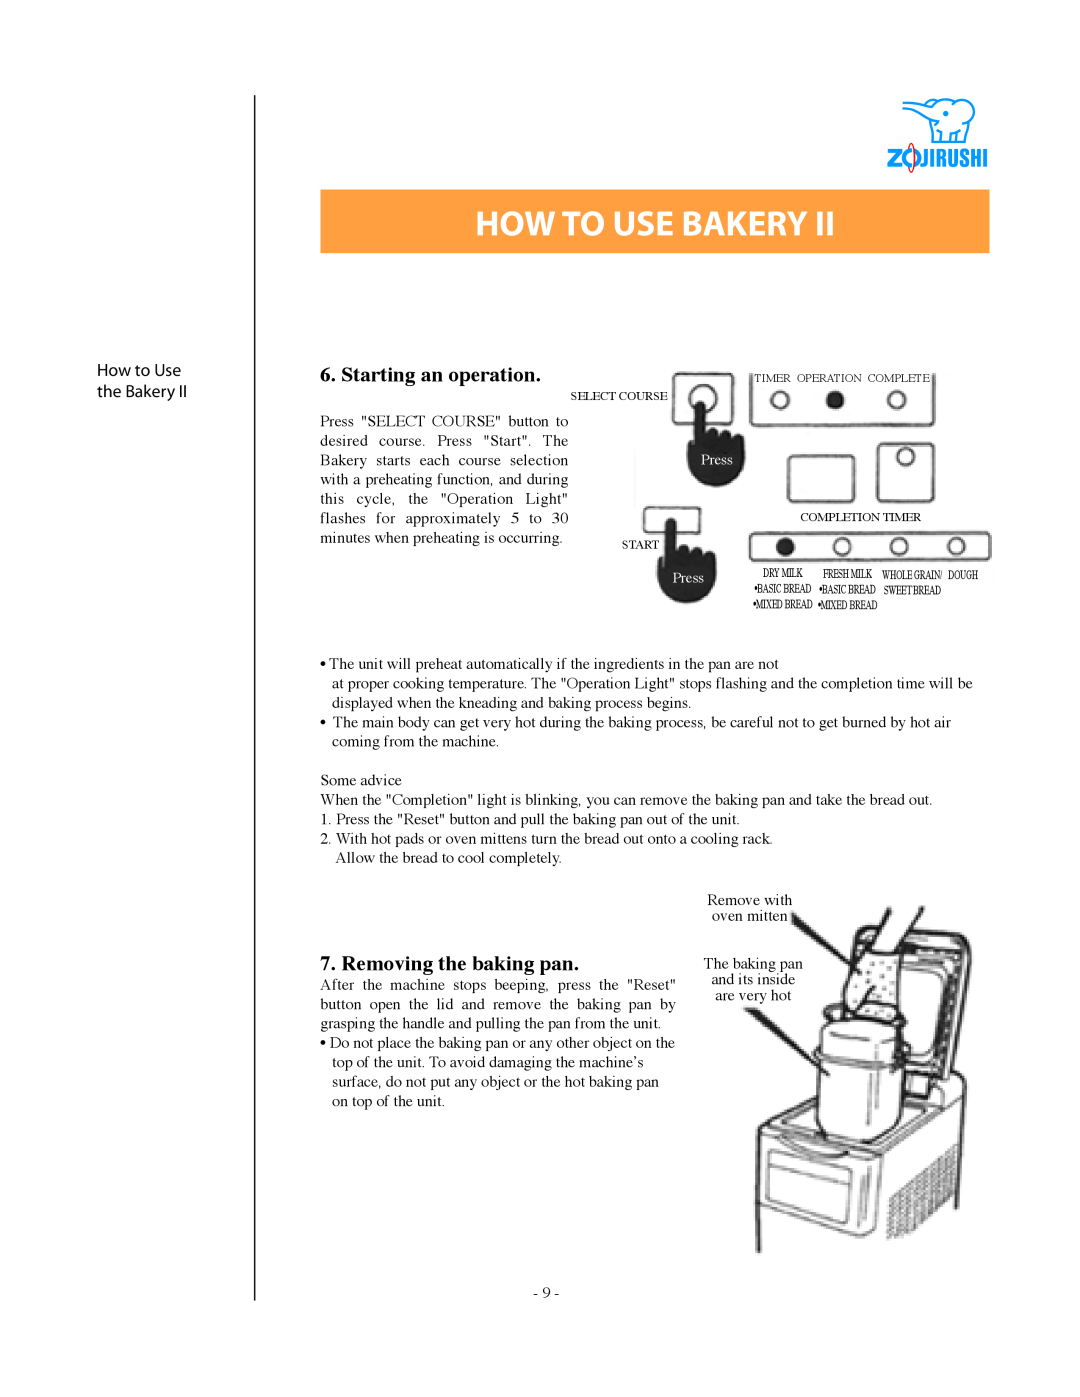 Zojirushi BBCC - M15 Starting an operation, Removing the baking pan, How To Use Bakery, How to Use the Bakery 